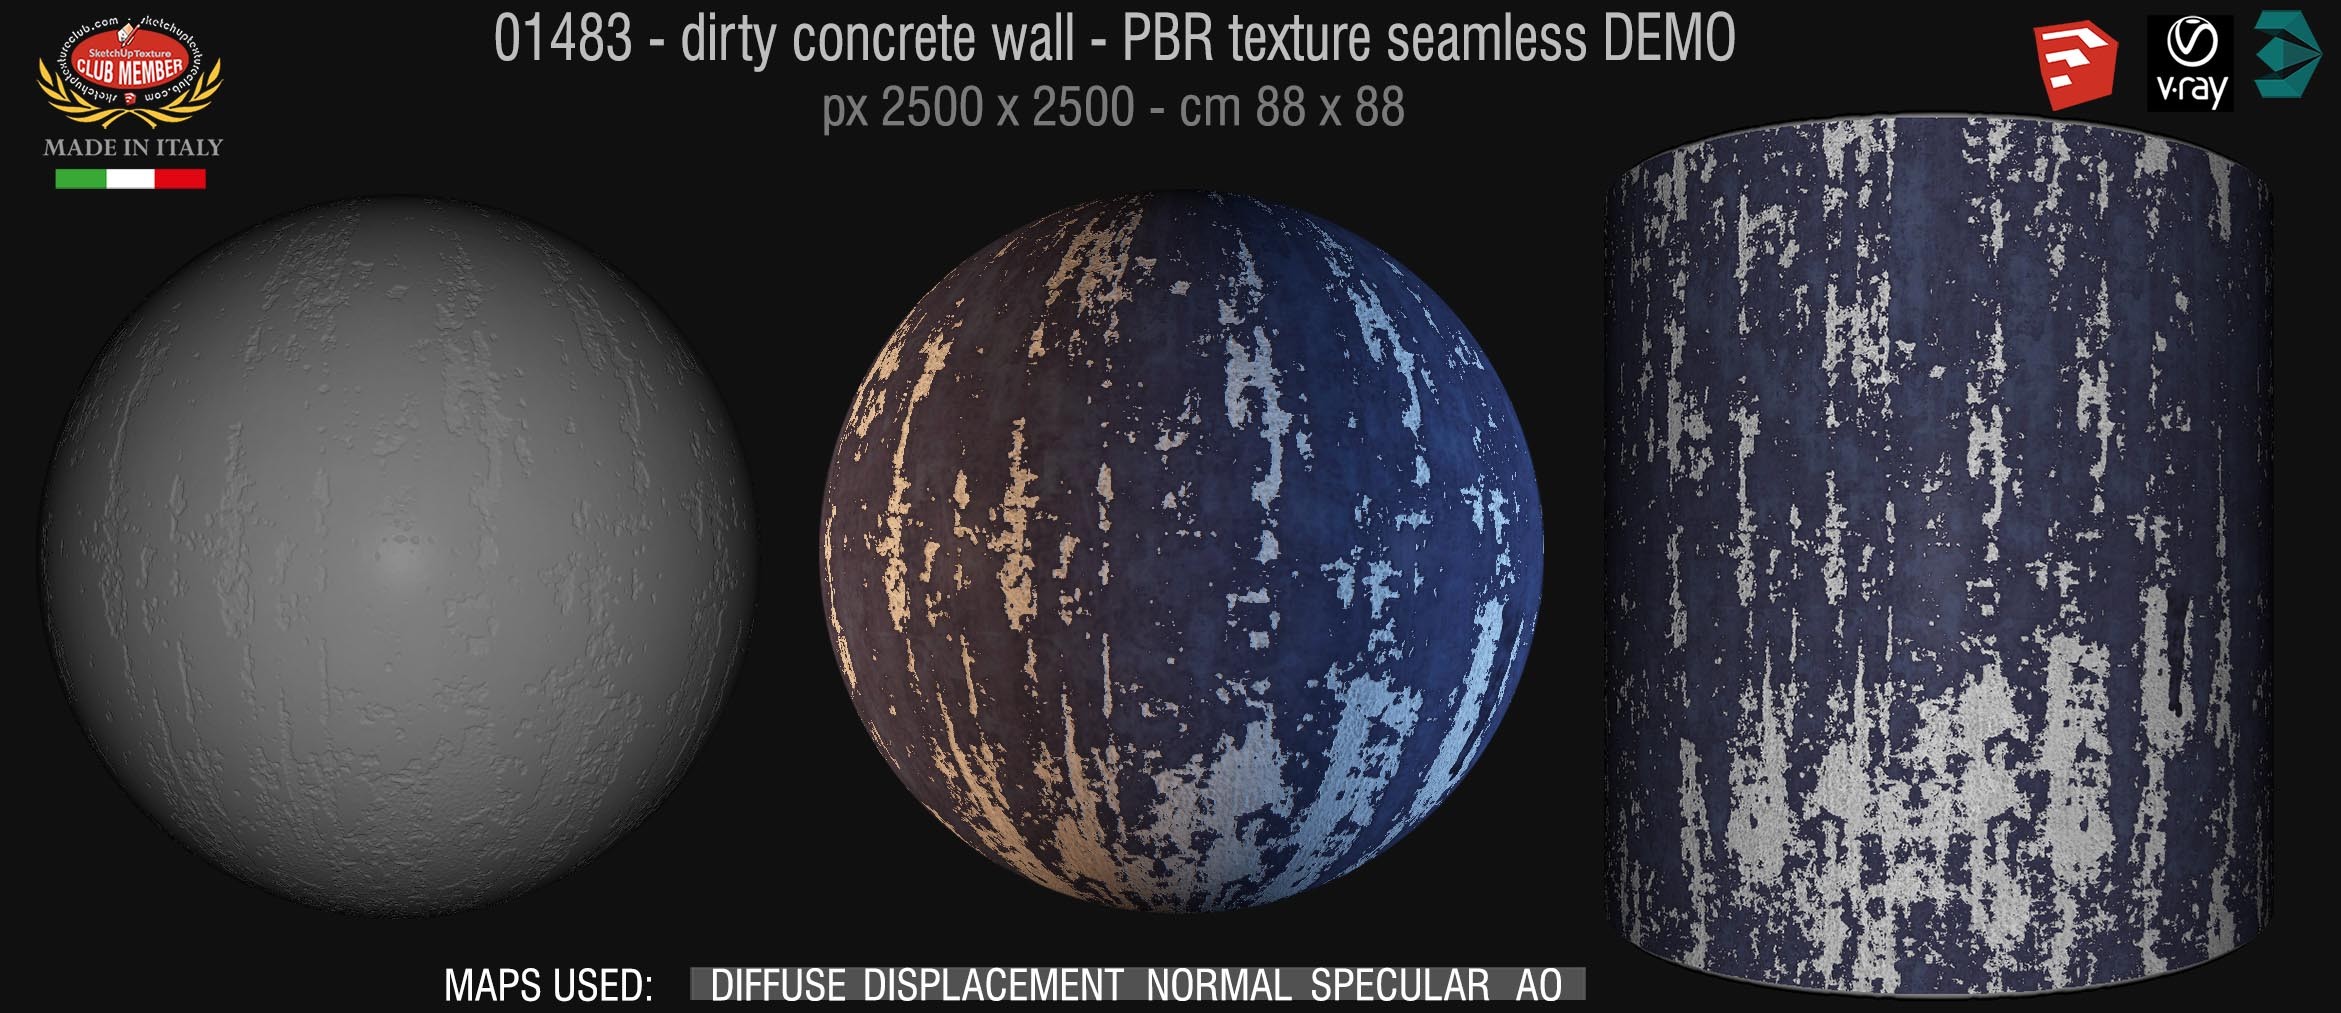 01483 Concrete bare dirty wall PBR texture seamless DEMO